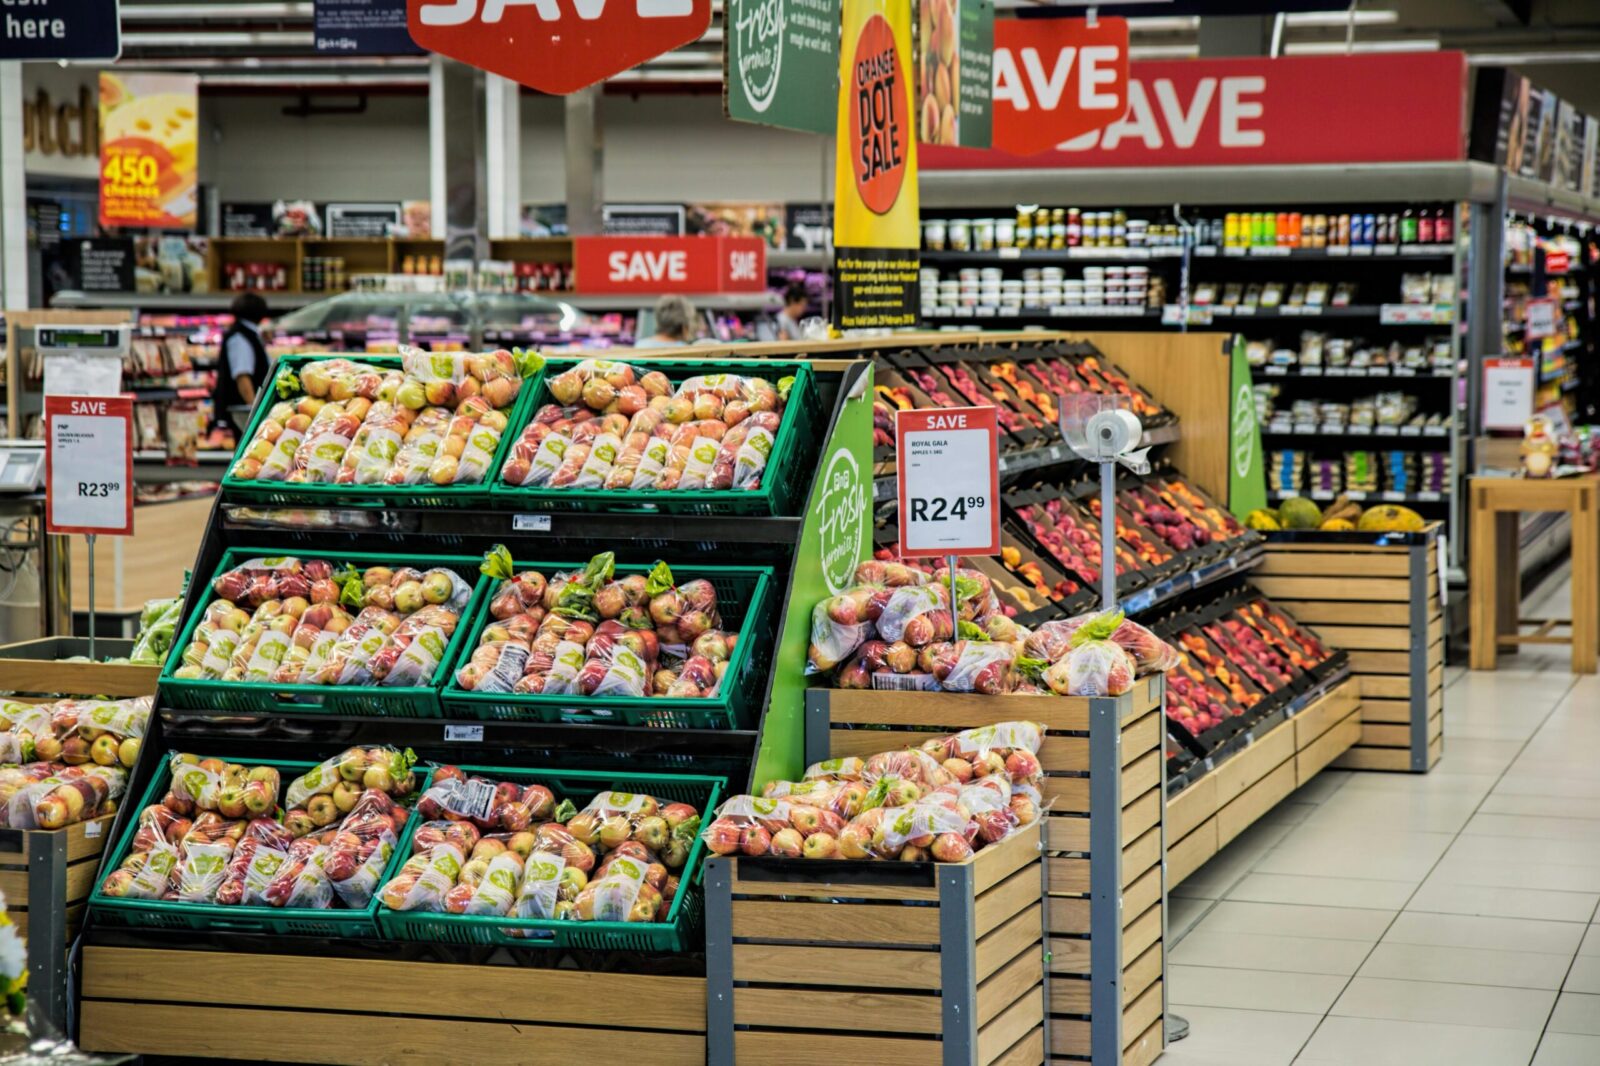 How to market grocery stores online through digital marketing